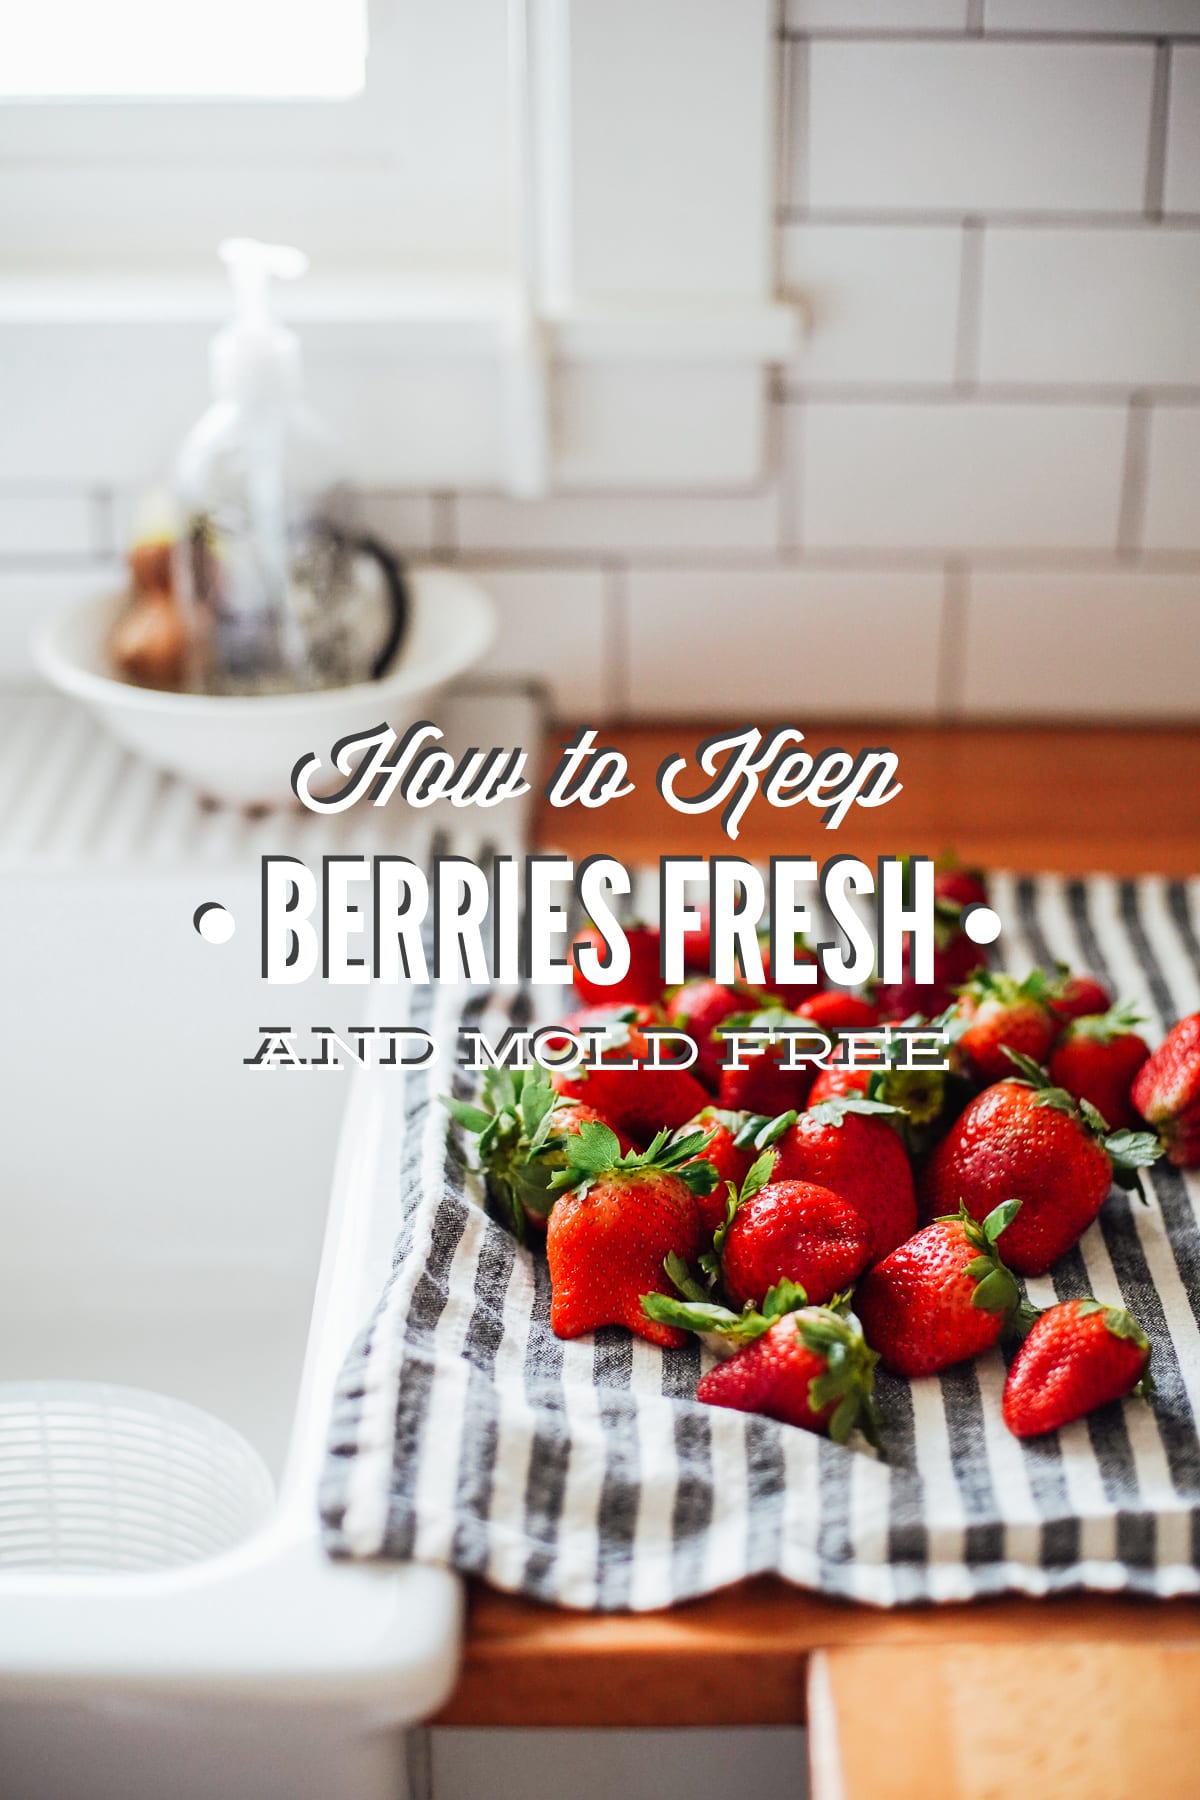 How to keep berries fresh and mold free